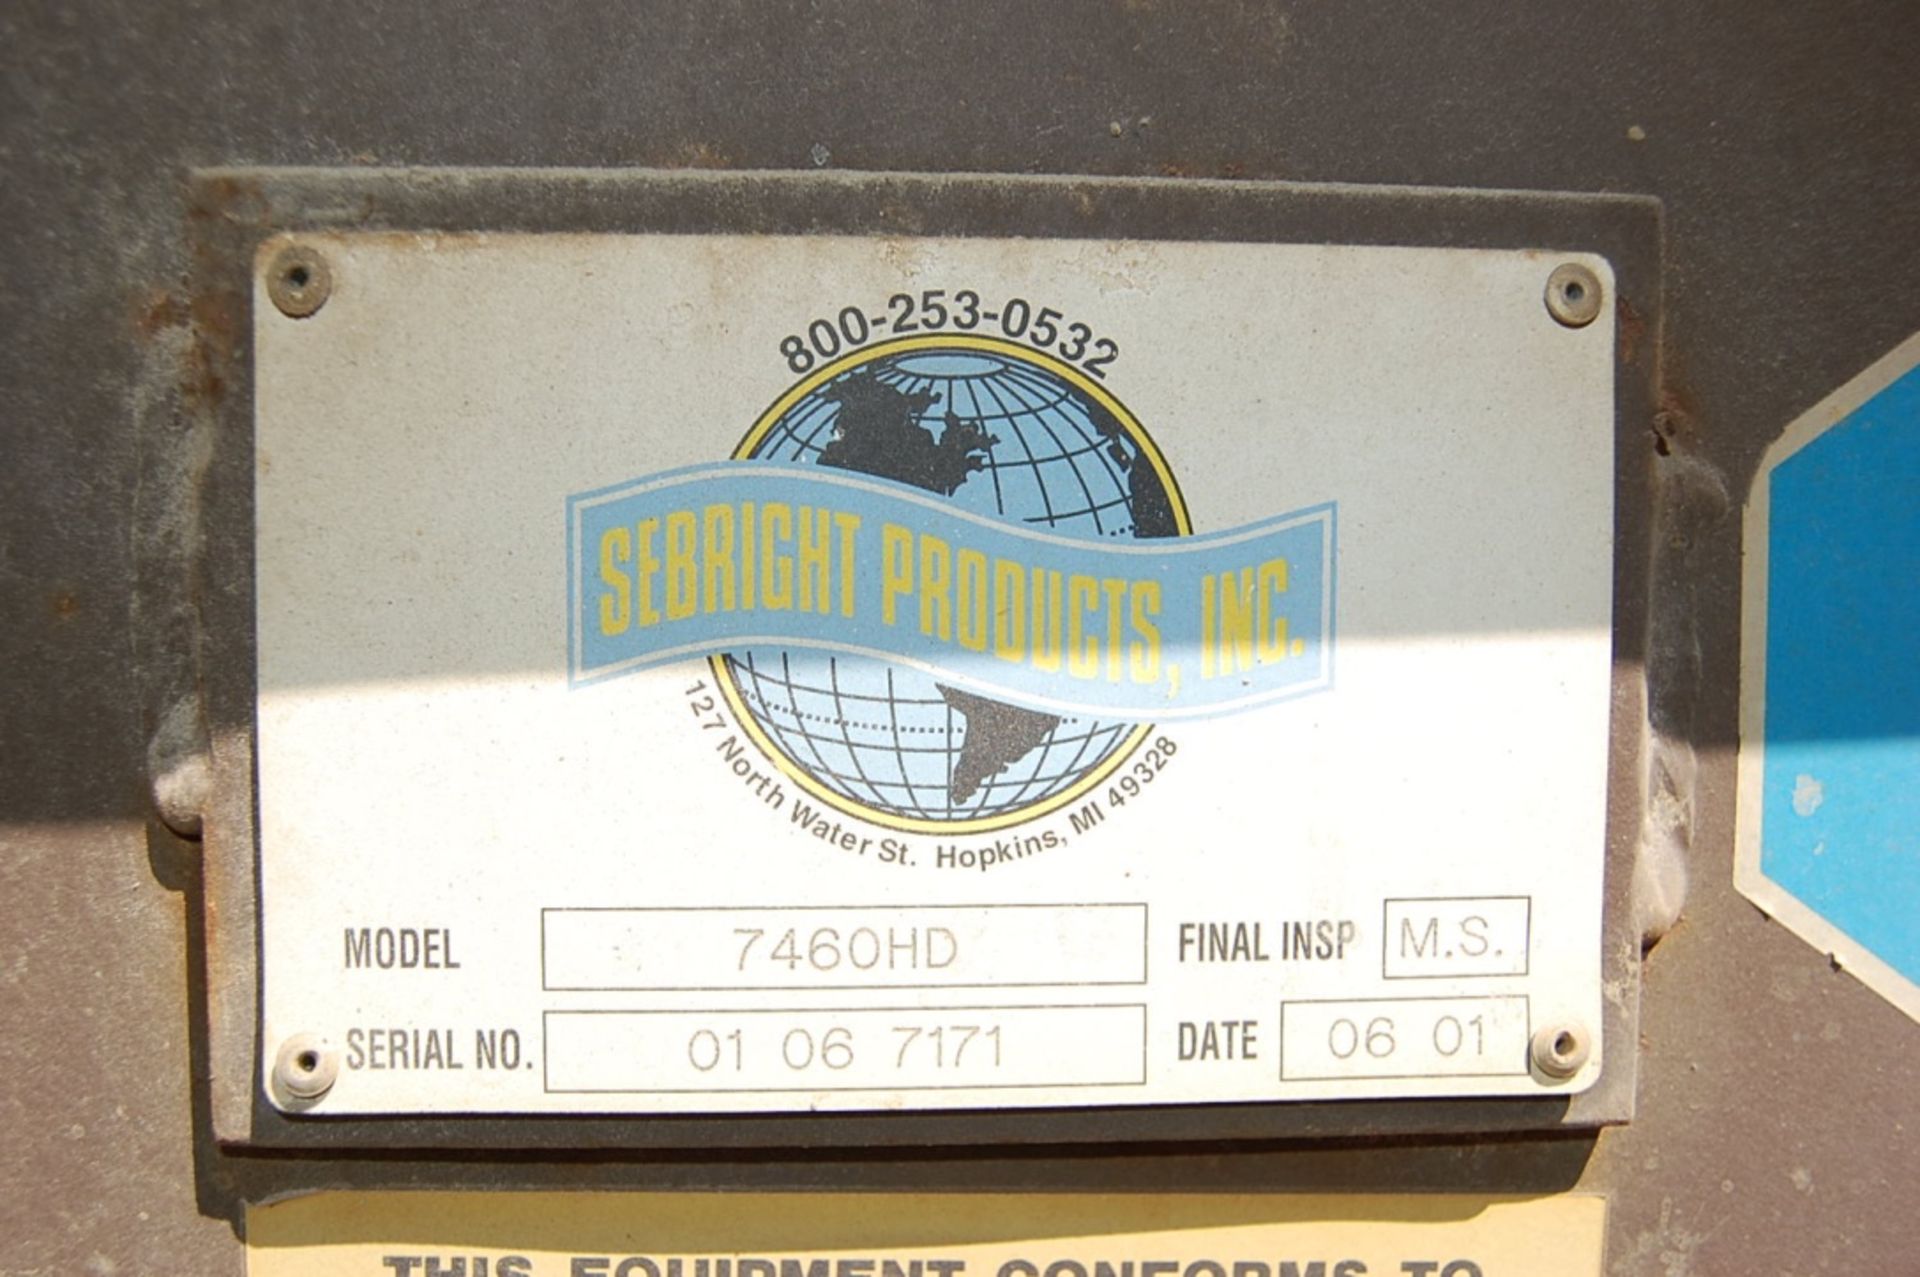 Sebright Products Model #7460HD Hydraulic Compactor, SN 01067171 LOADING FEE: $2000 - Image 2 of 4